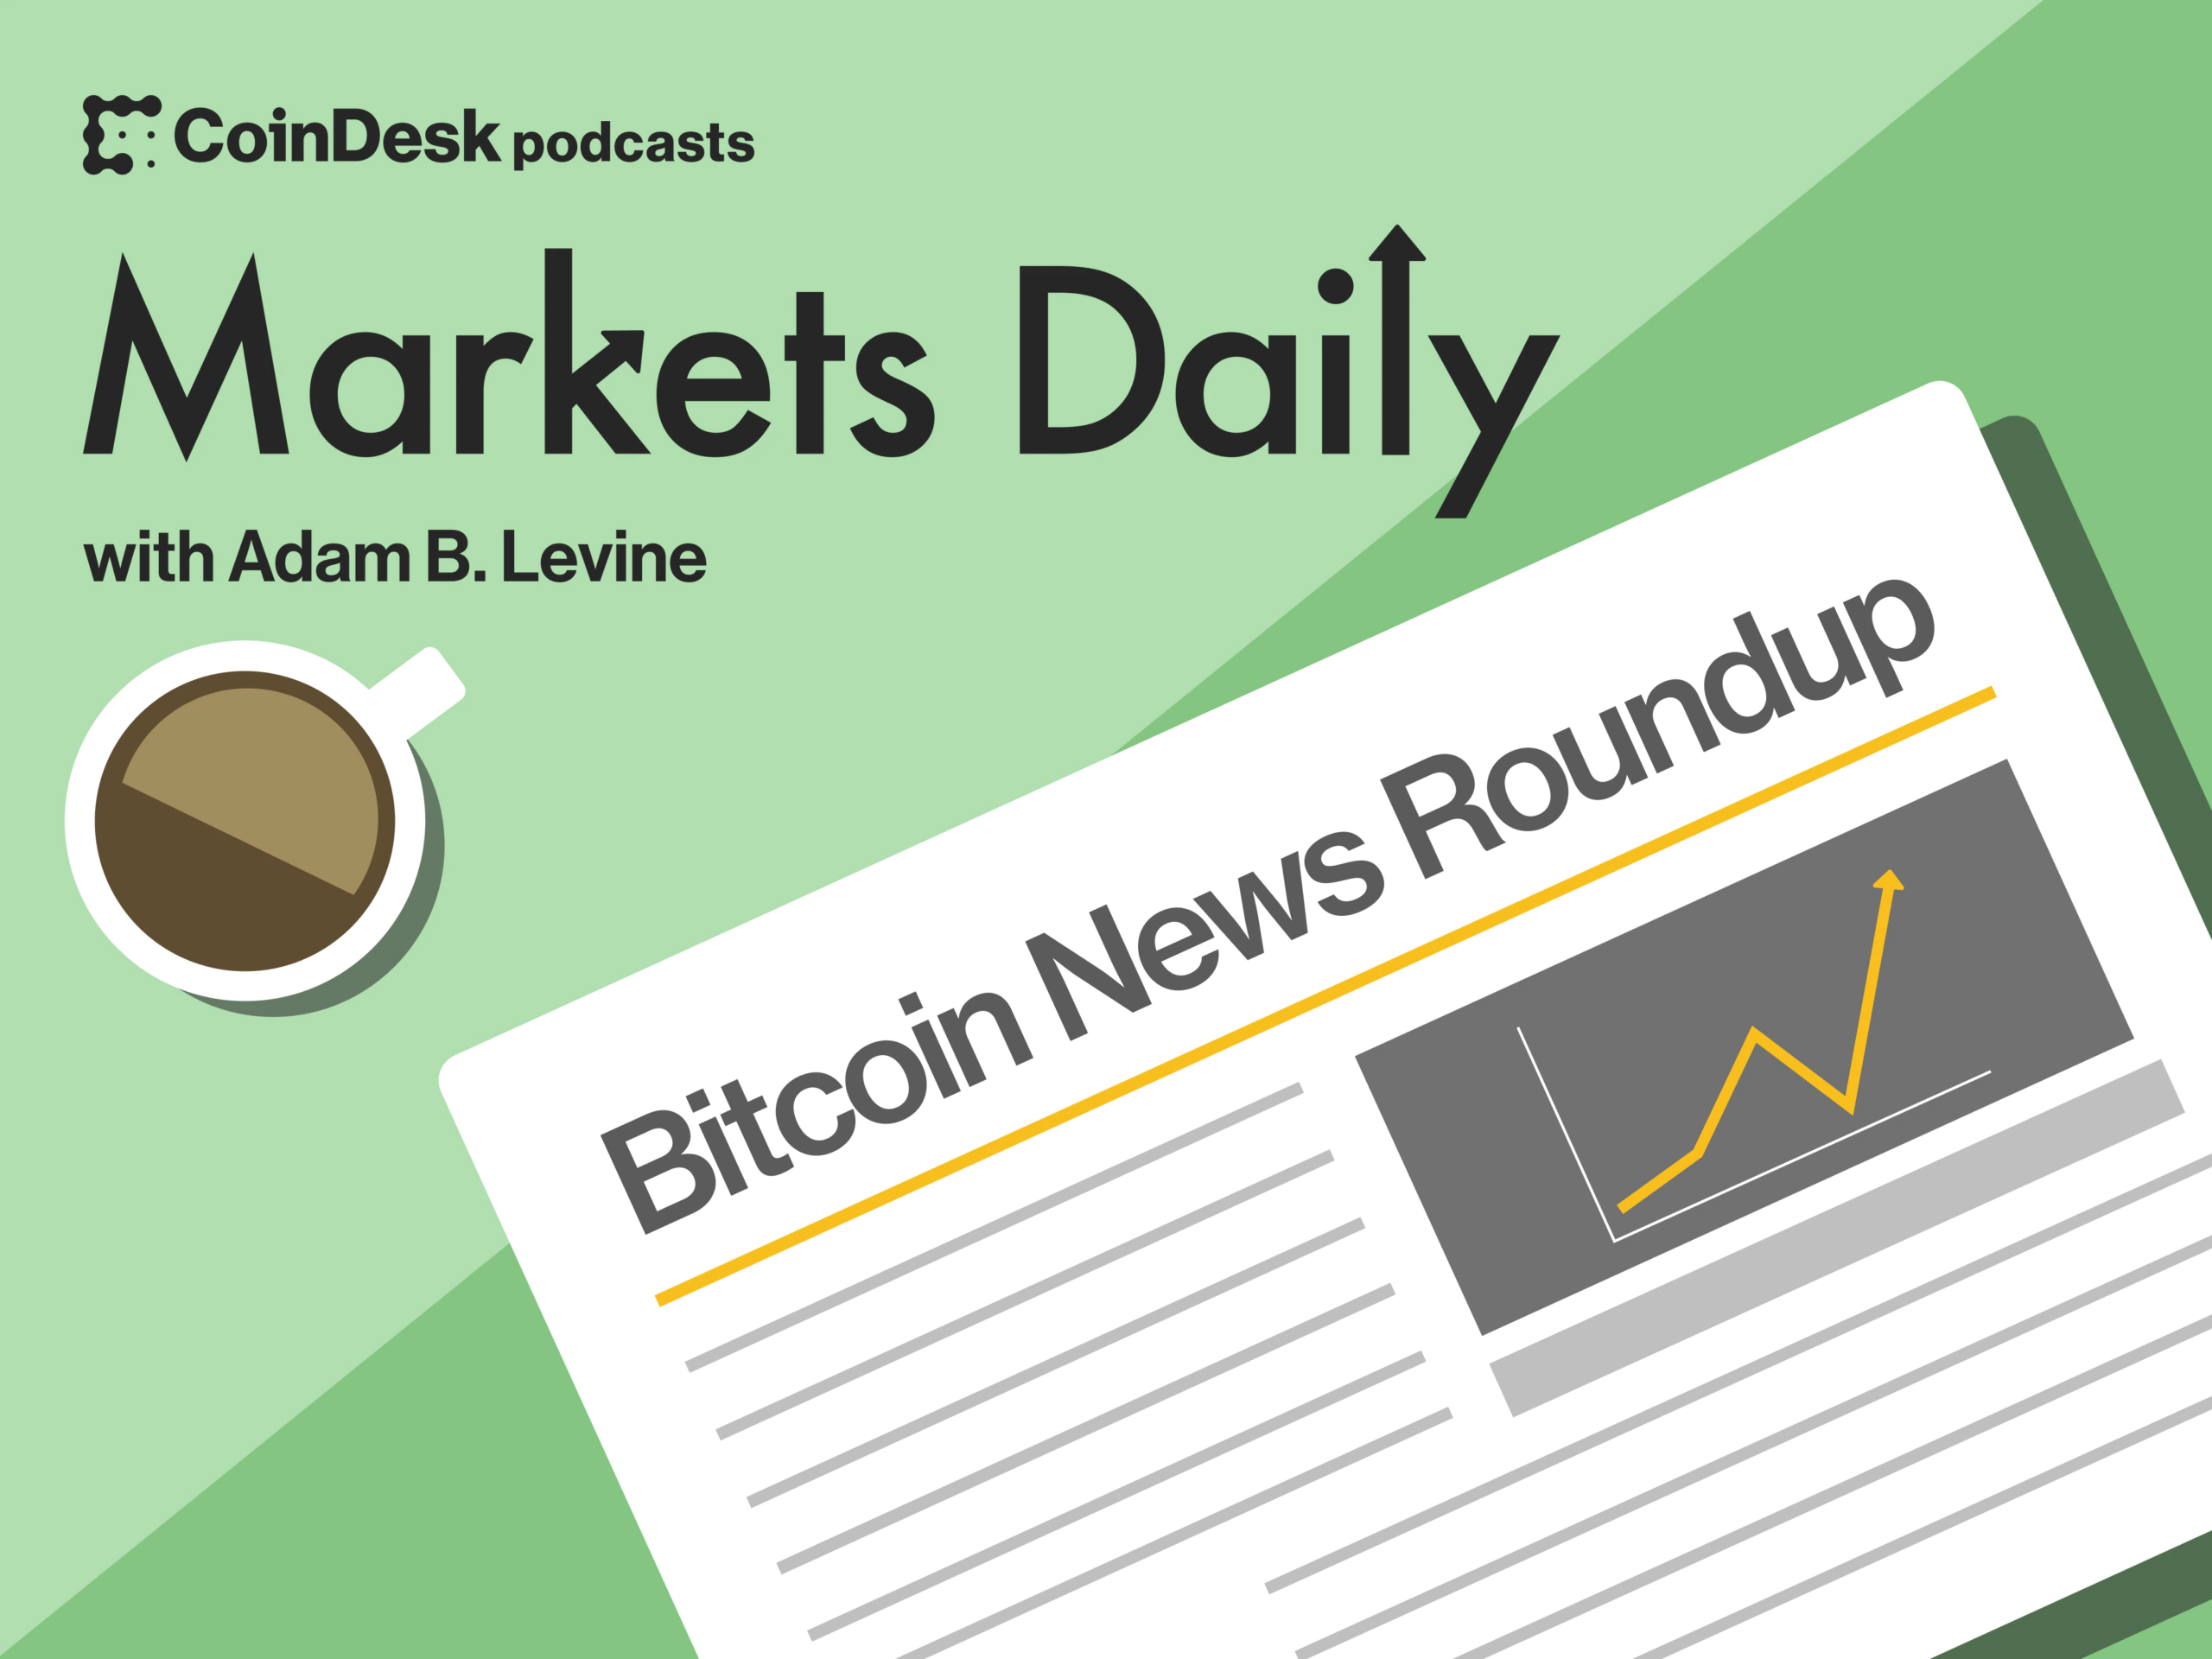 Crypto News Roundup for Oct. 4, 2021